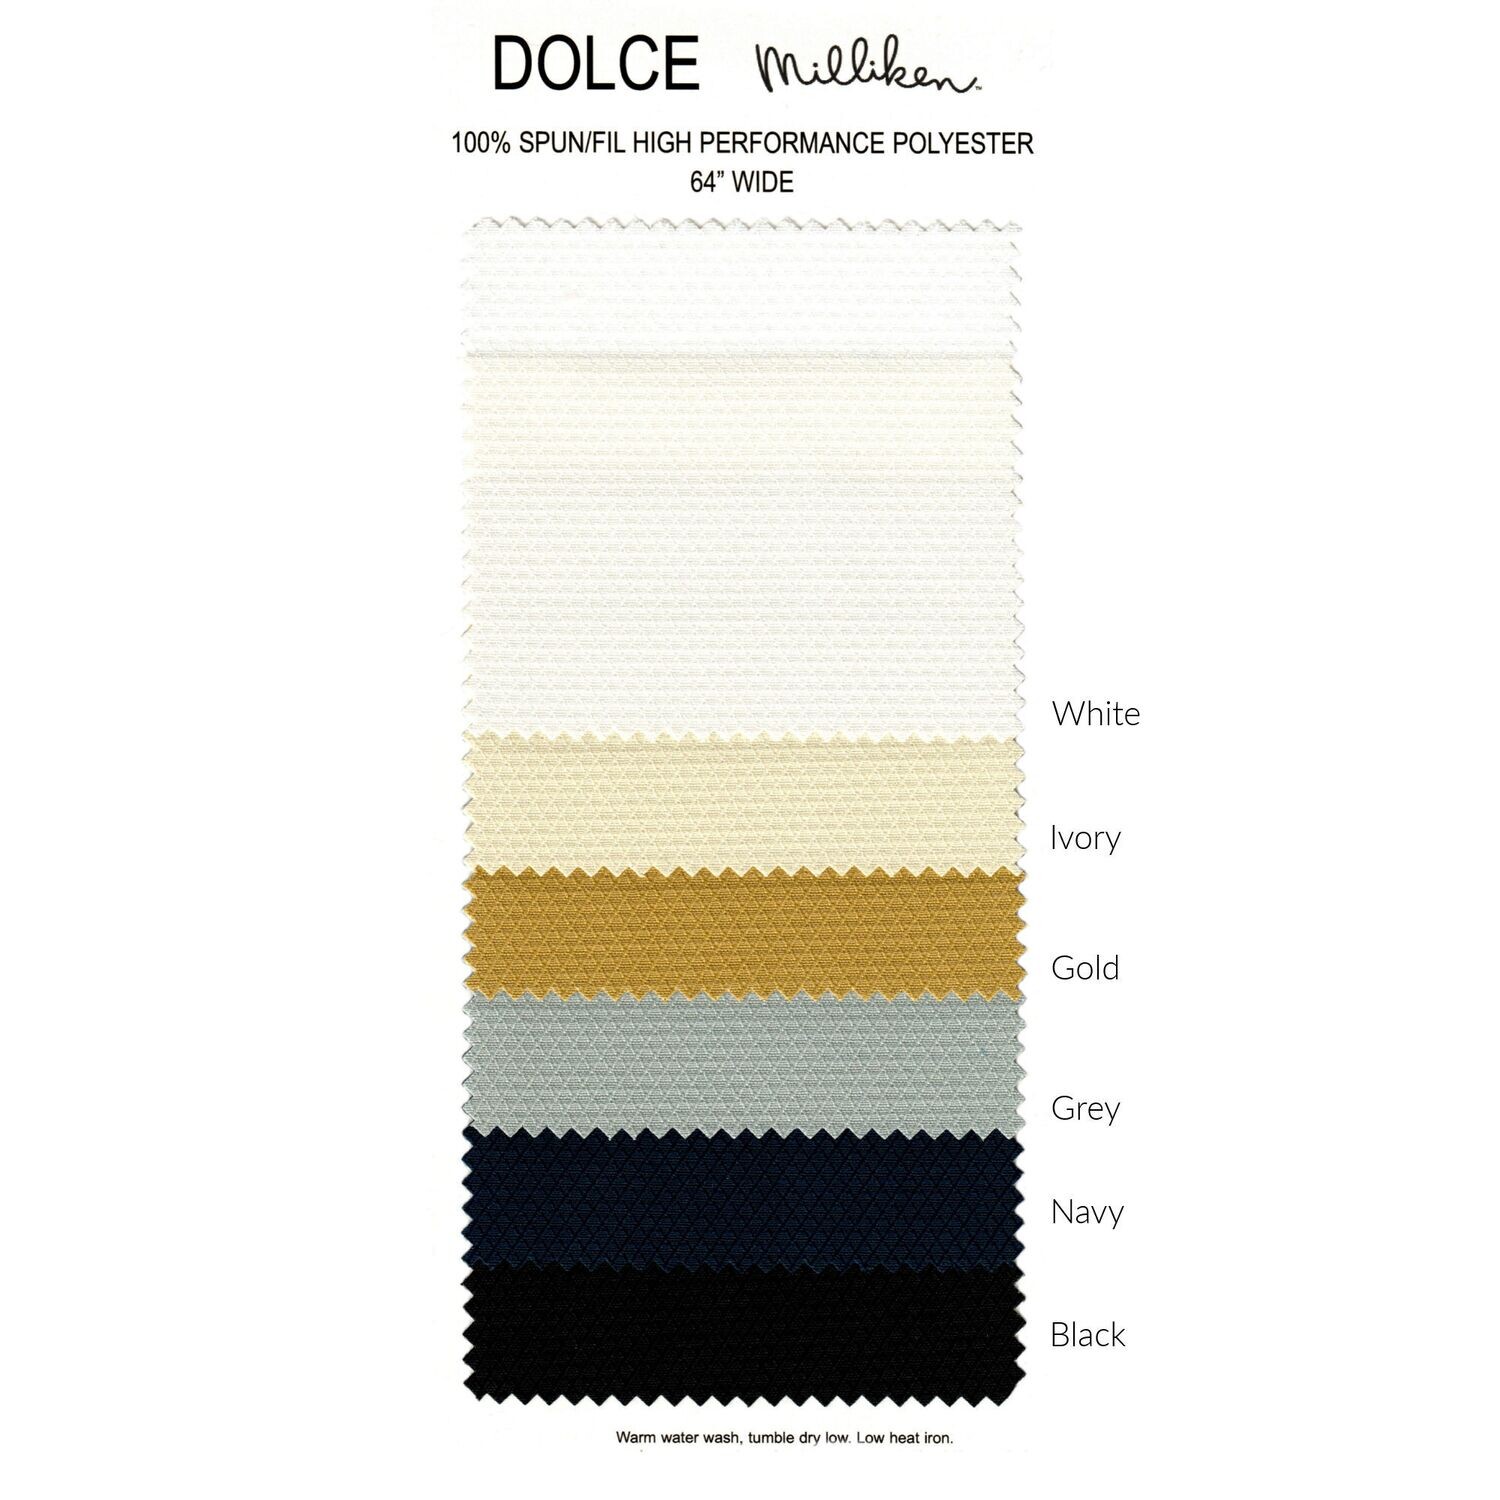 Dolce Swatch Card